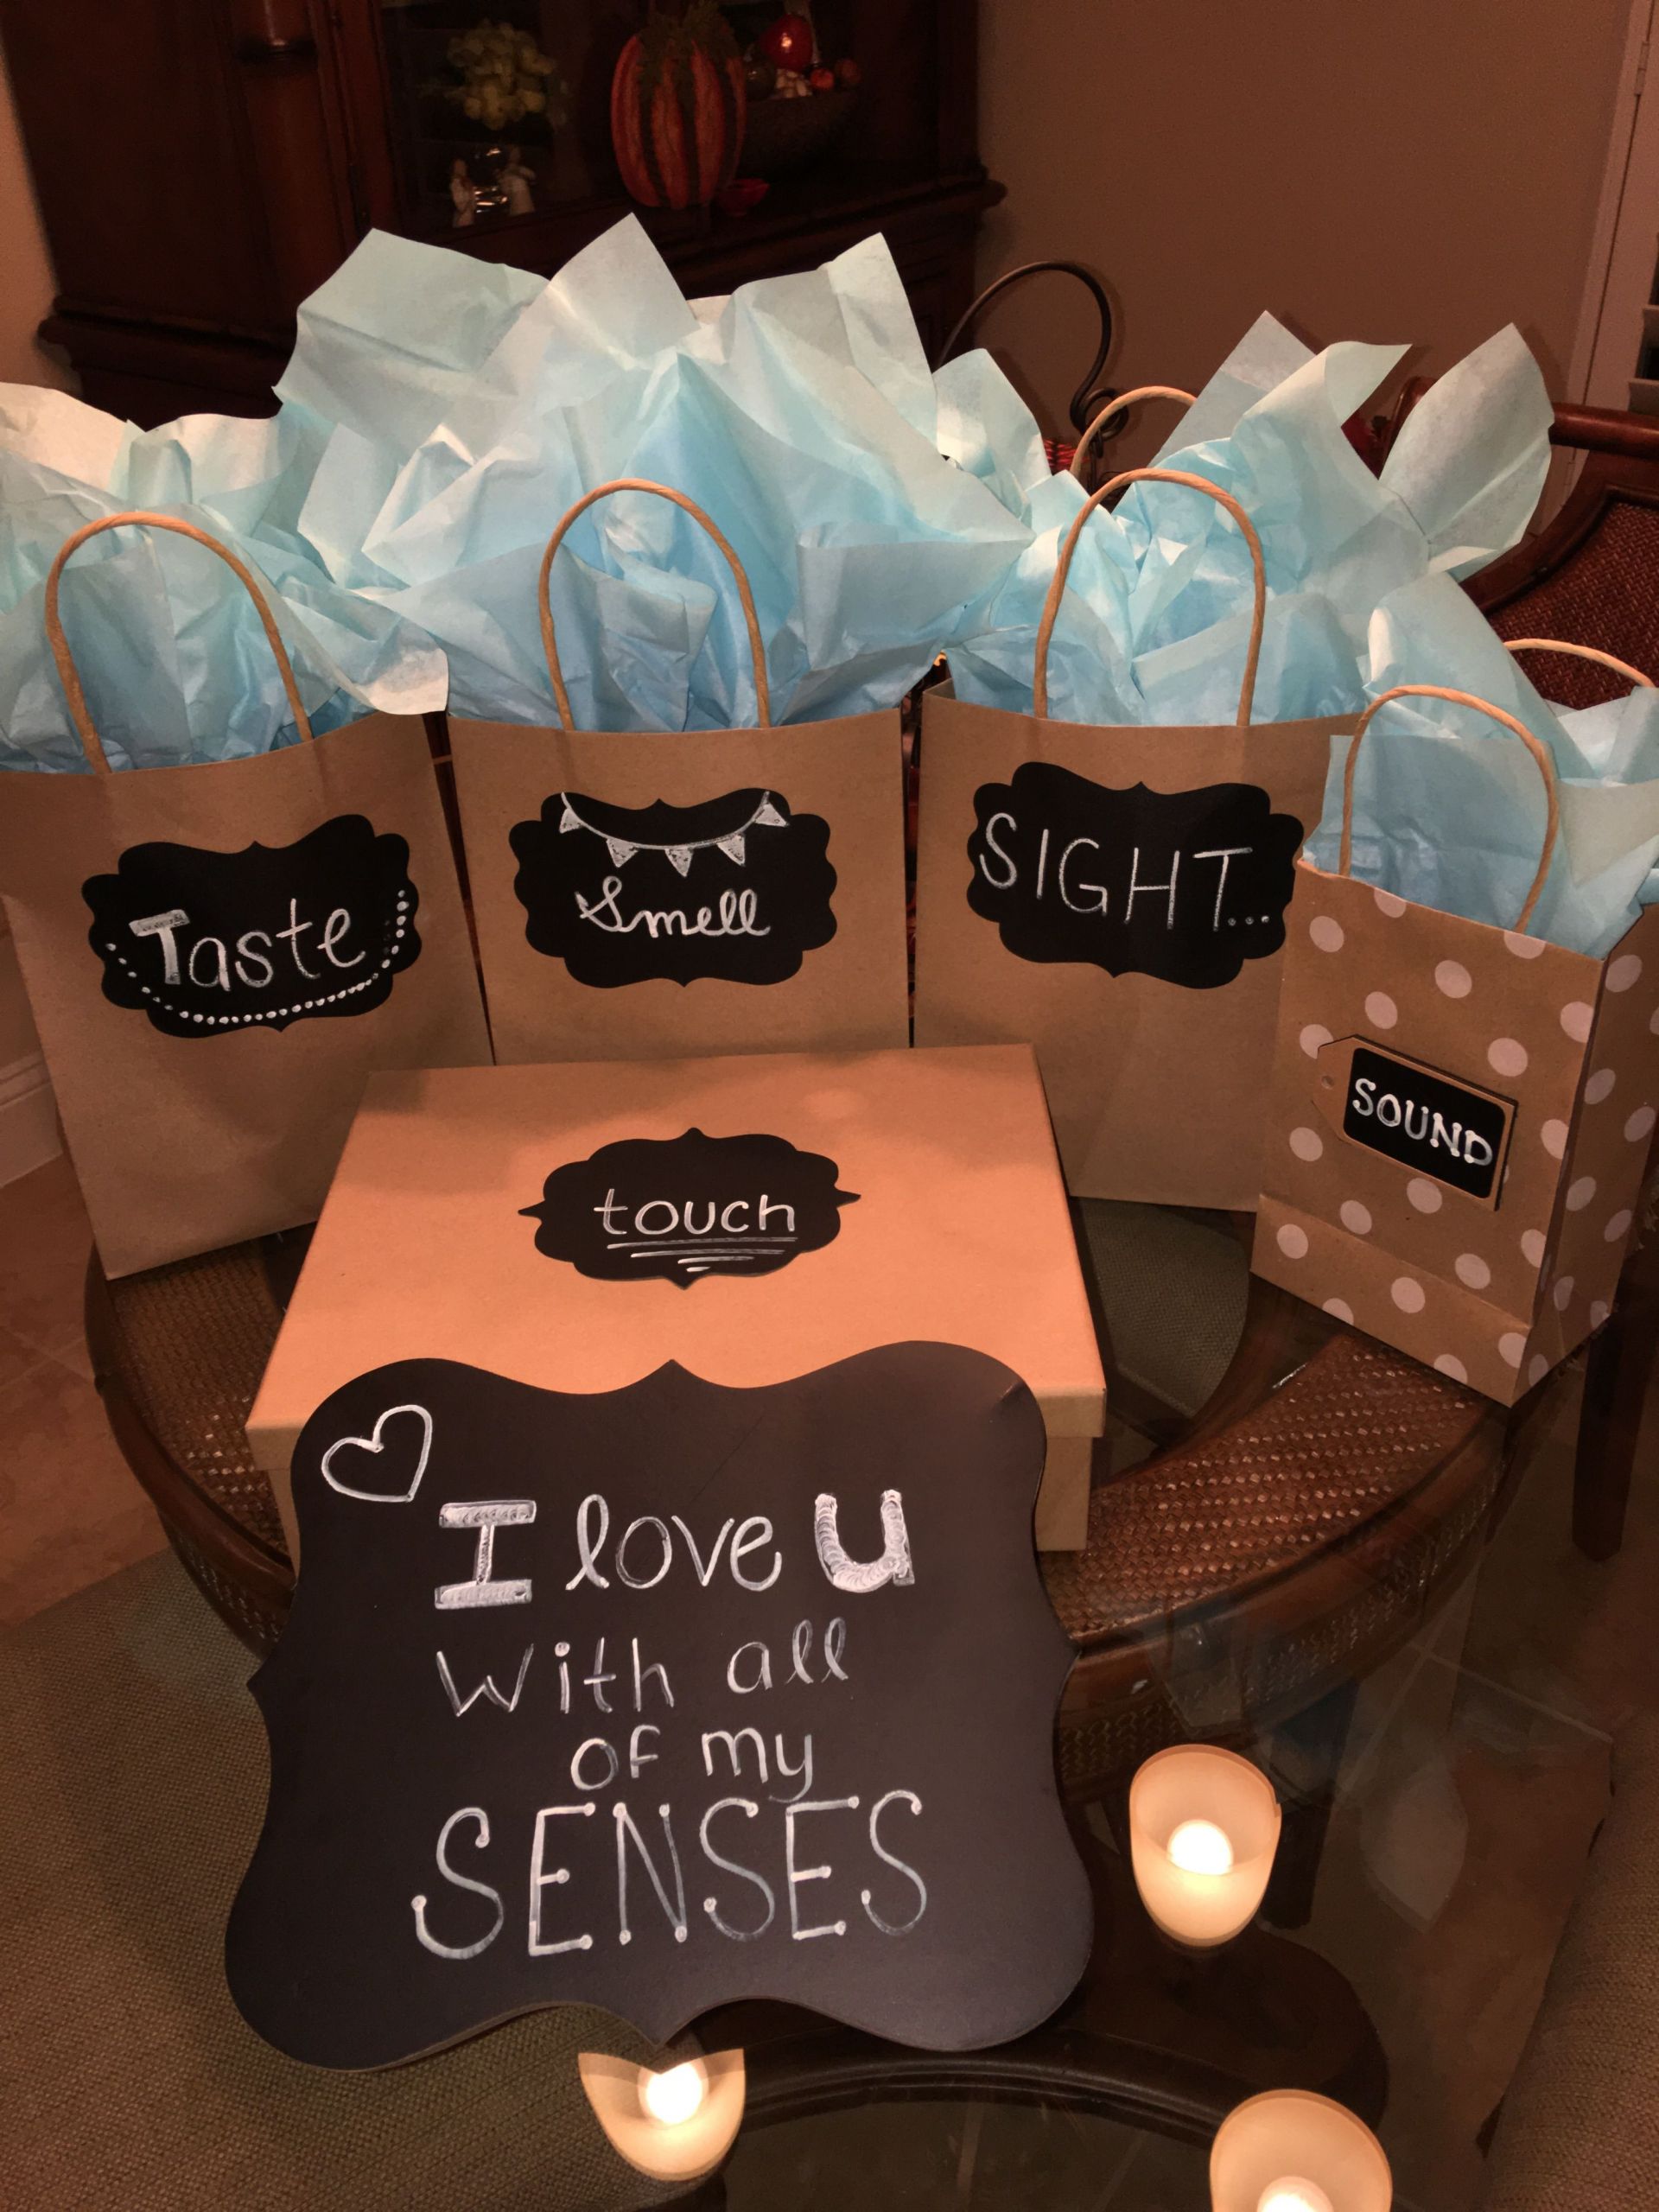 Best Birthday Gift Ideas For Boyfriend
 I love you with all of my senses my version for my